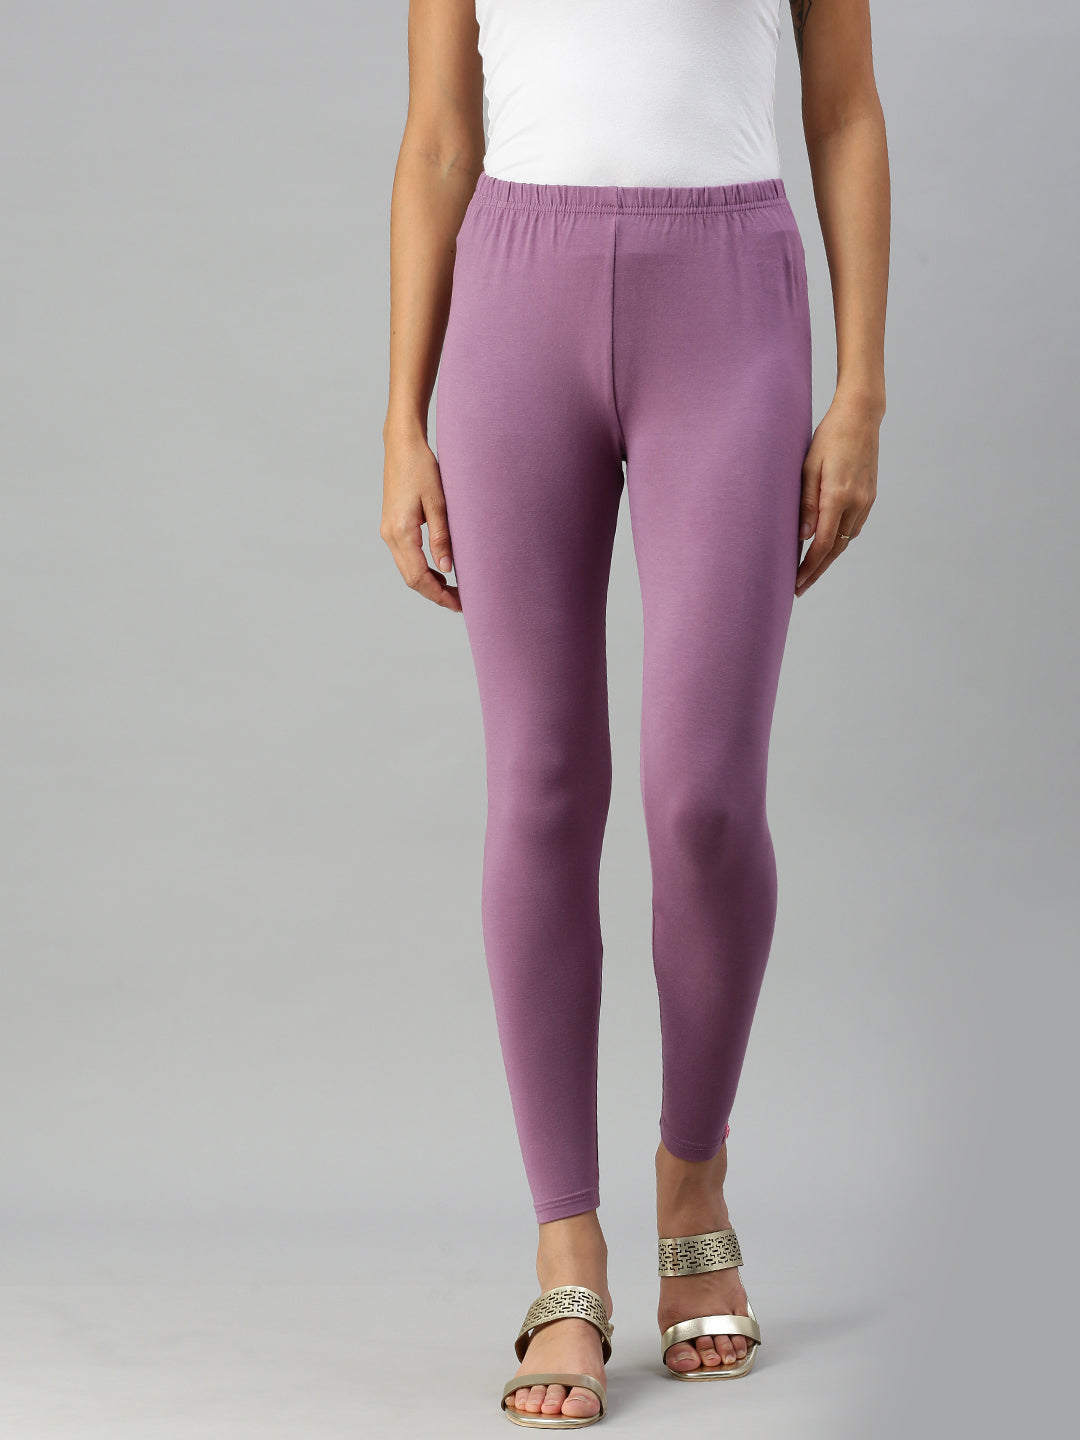 Shop Prisma's Grey Ankle Leggings for Comfortable Style